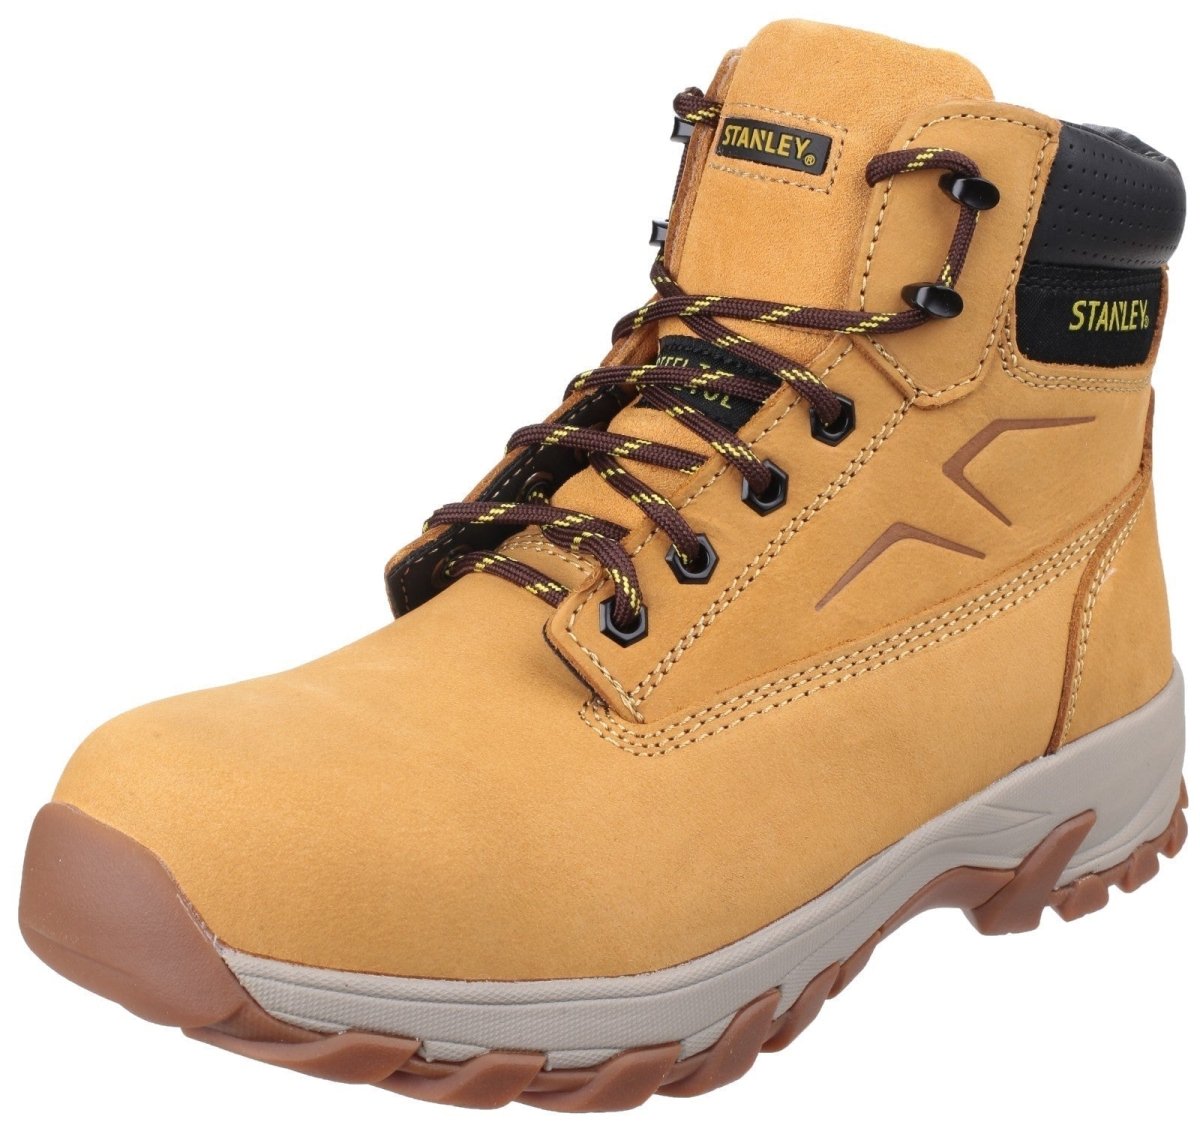 Stanley Tradesman Mens Steel Toe Cap Safety Boots - Shoe Store Direct